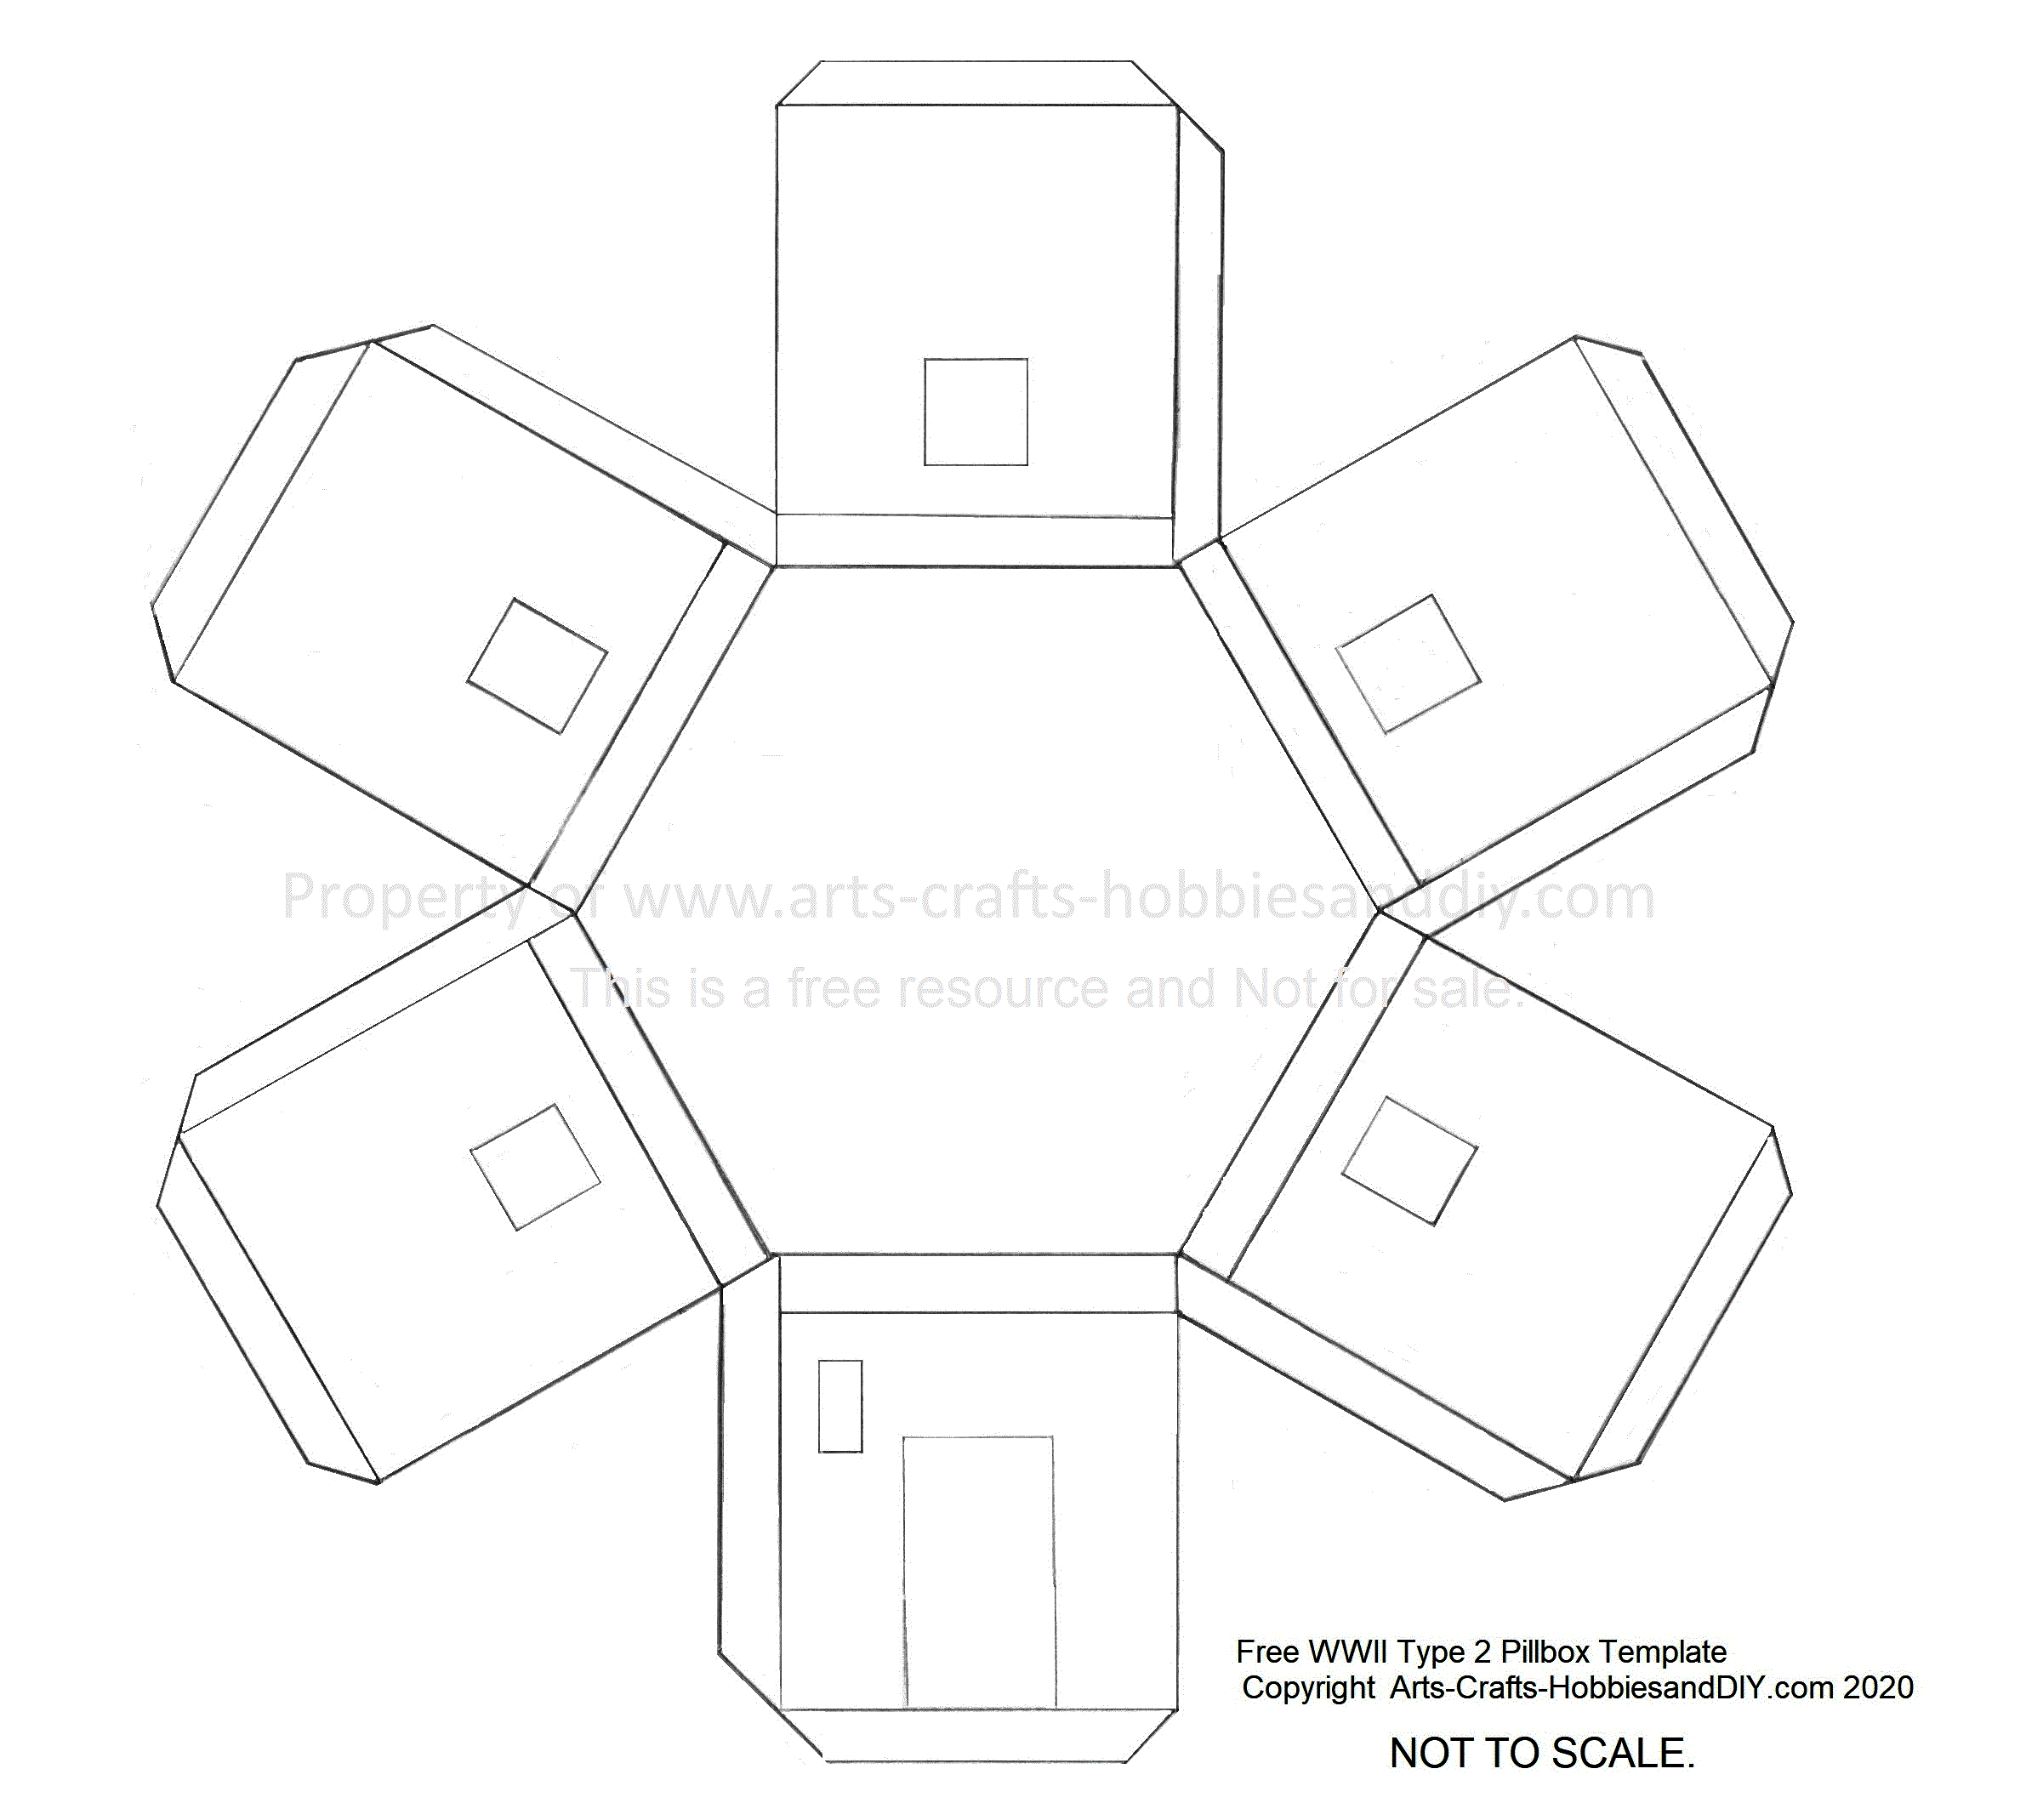 Free WWII TYpe 22 bunker template